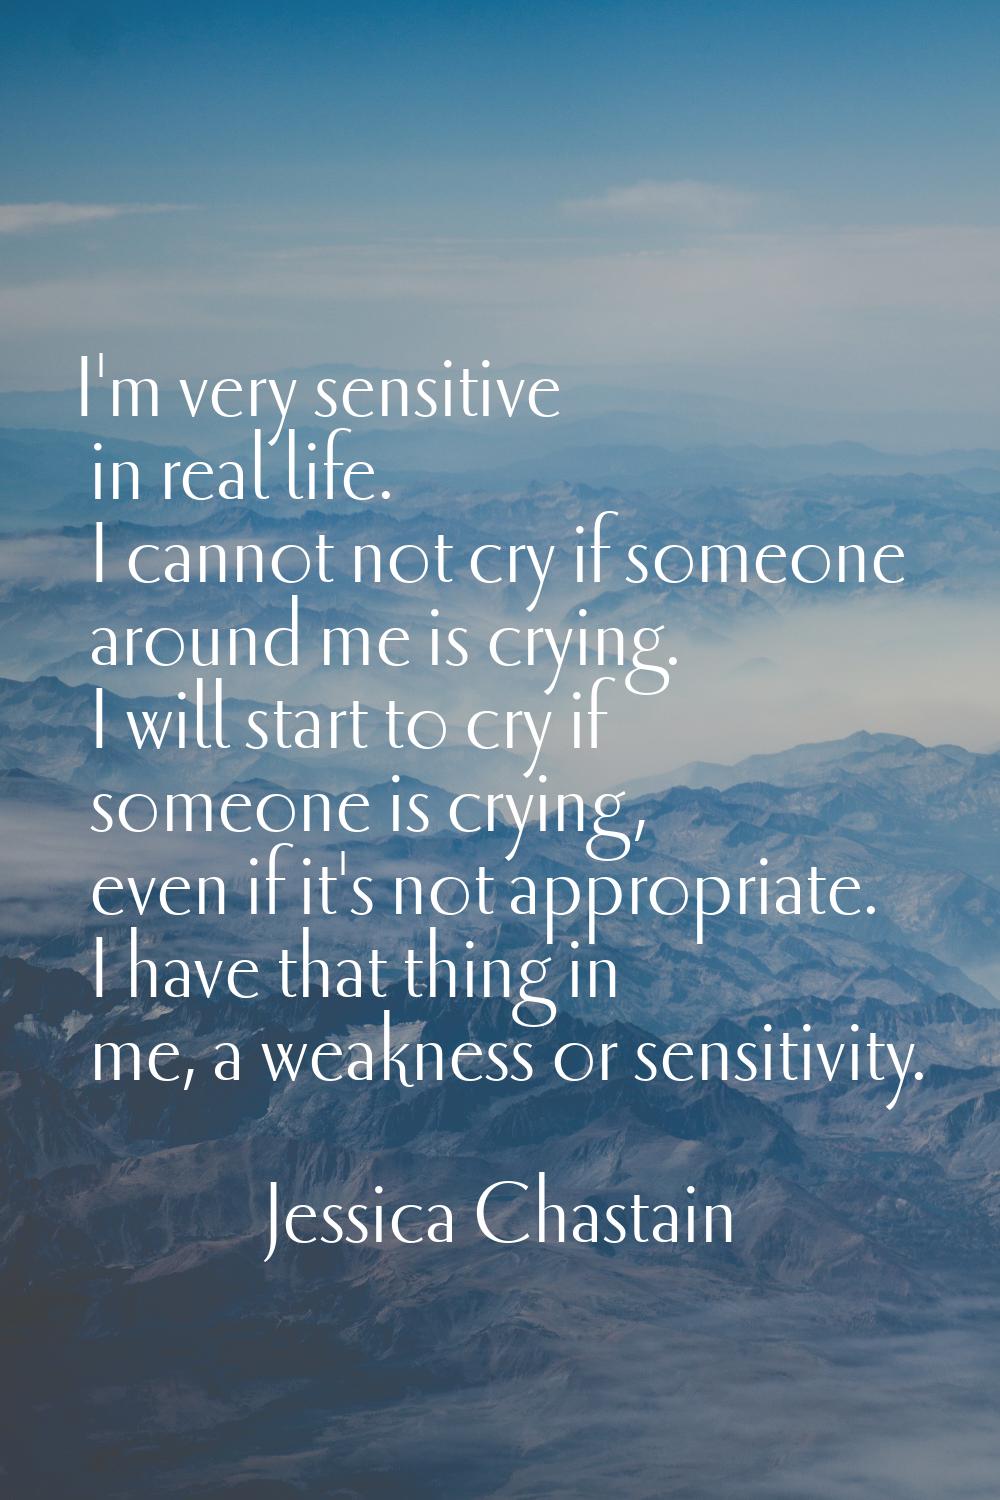 I'm very sensitive in real life. I cannot not cry if someone around me is crying. I will start to c